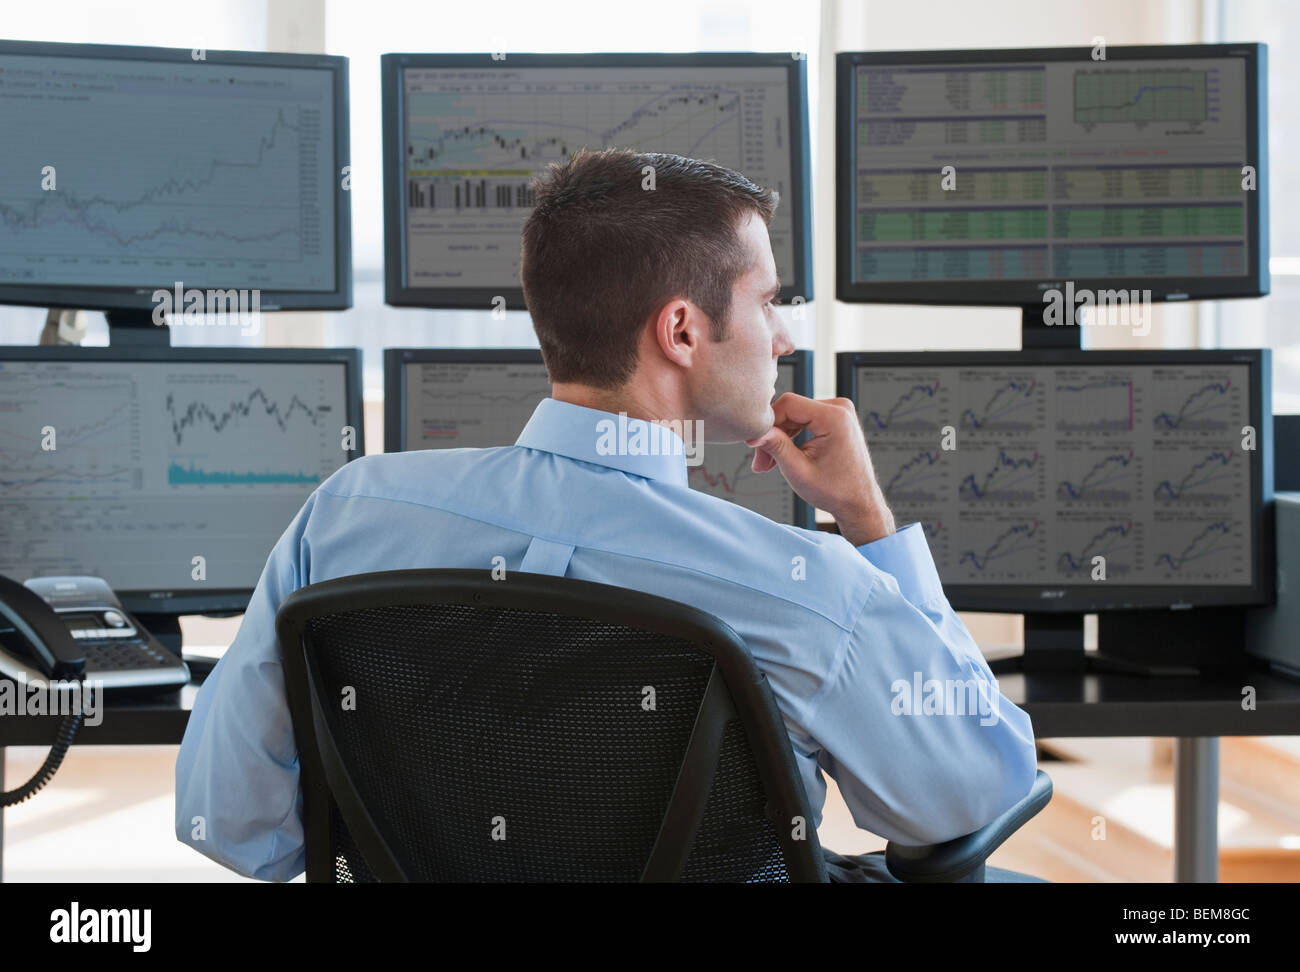 Male trader at work Stock Photo